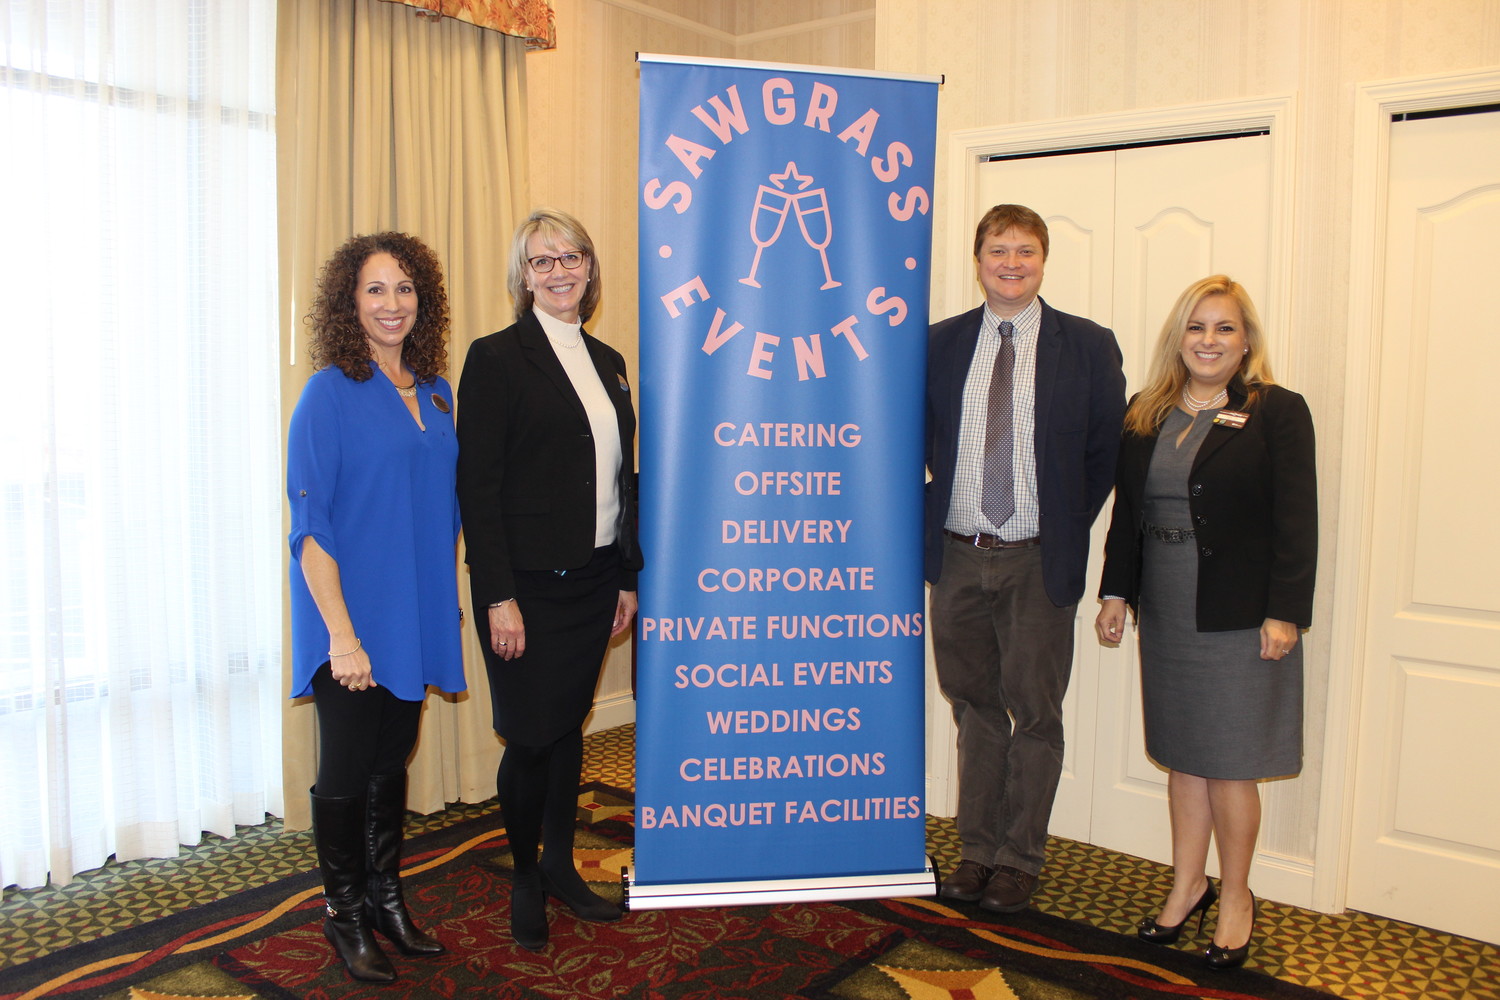 Hilton Garden Inn employees Anna Washington, Carol Mauer, Ted Hayes and Anette Saalmann share the news about the formation of Sawgrass Events at a recent tasting event.